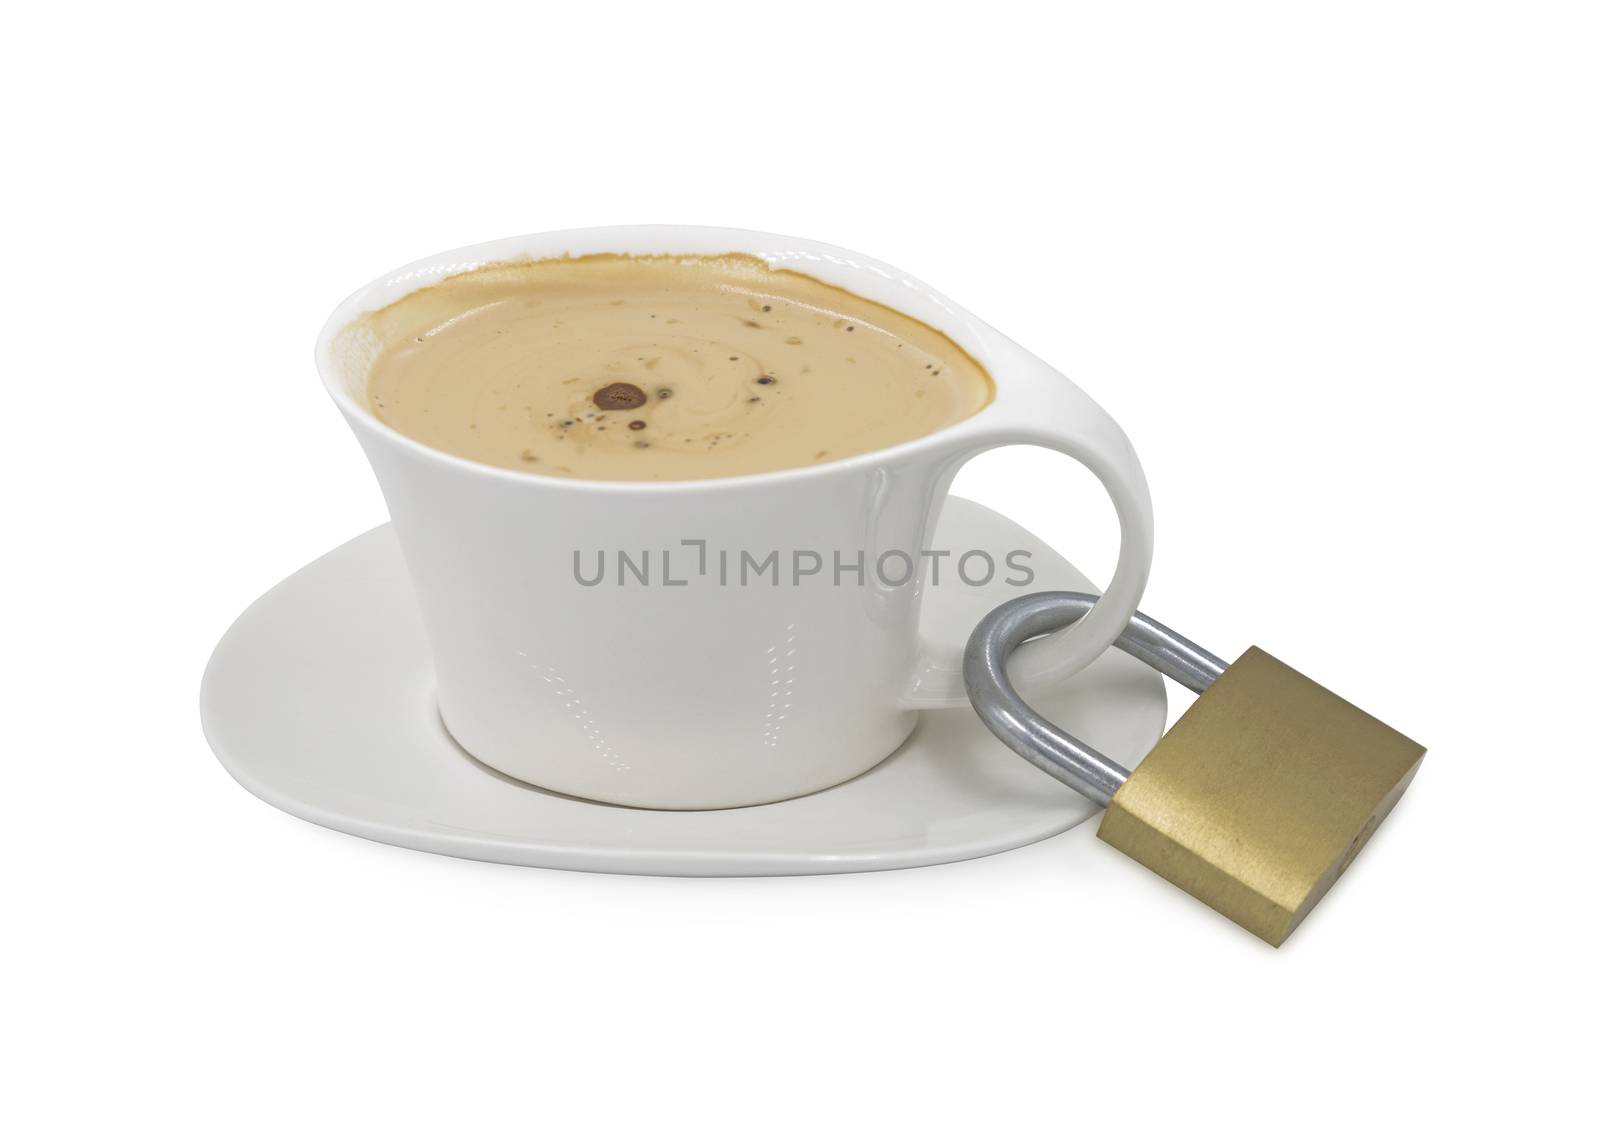 a cup of coffee or cappuccino locked with a padlock during the coronavirus time